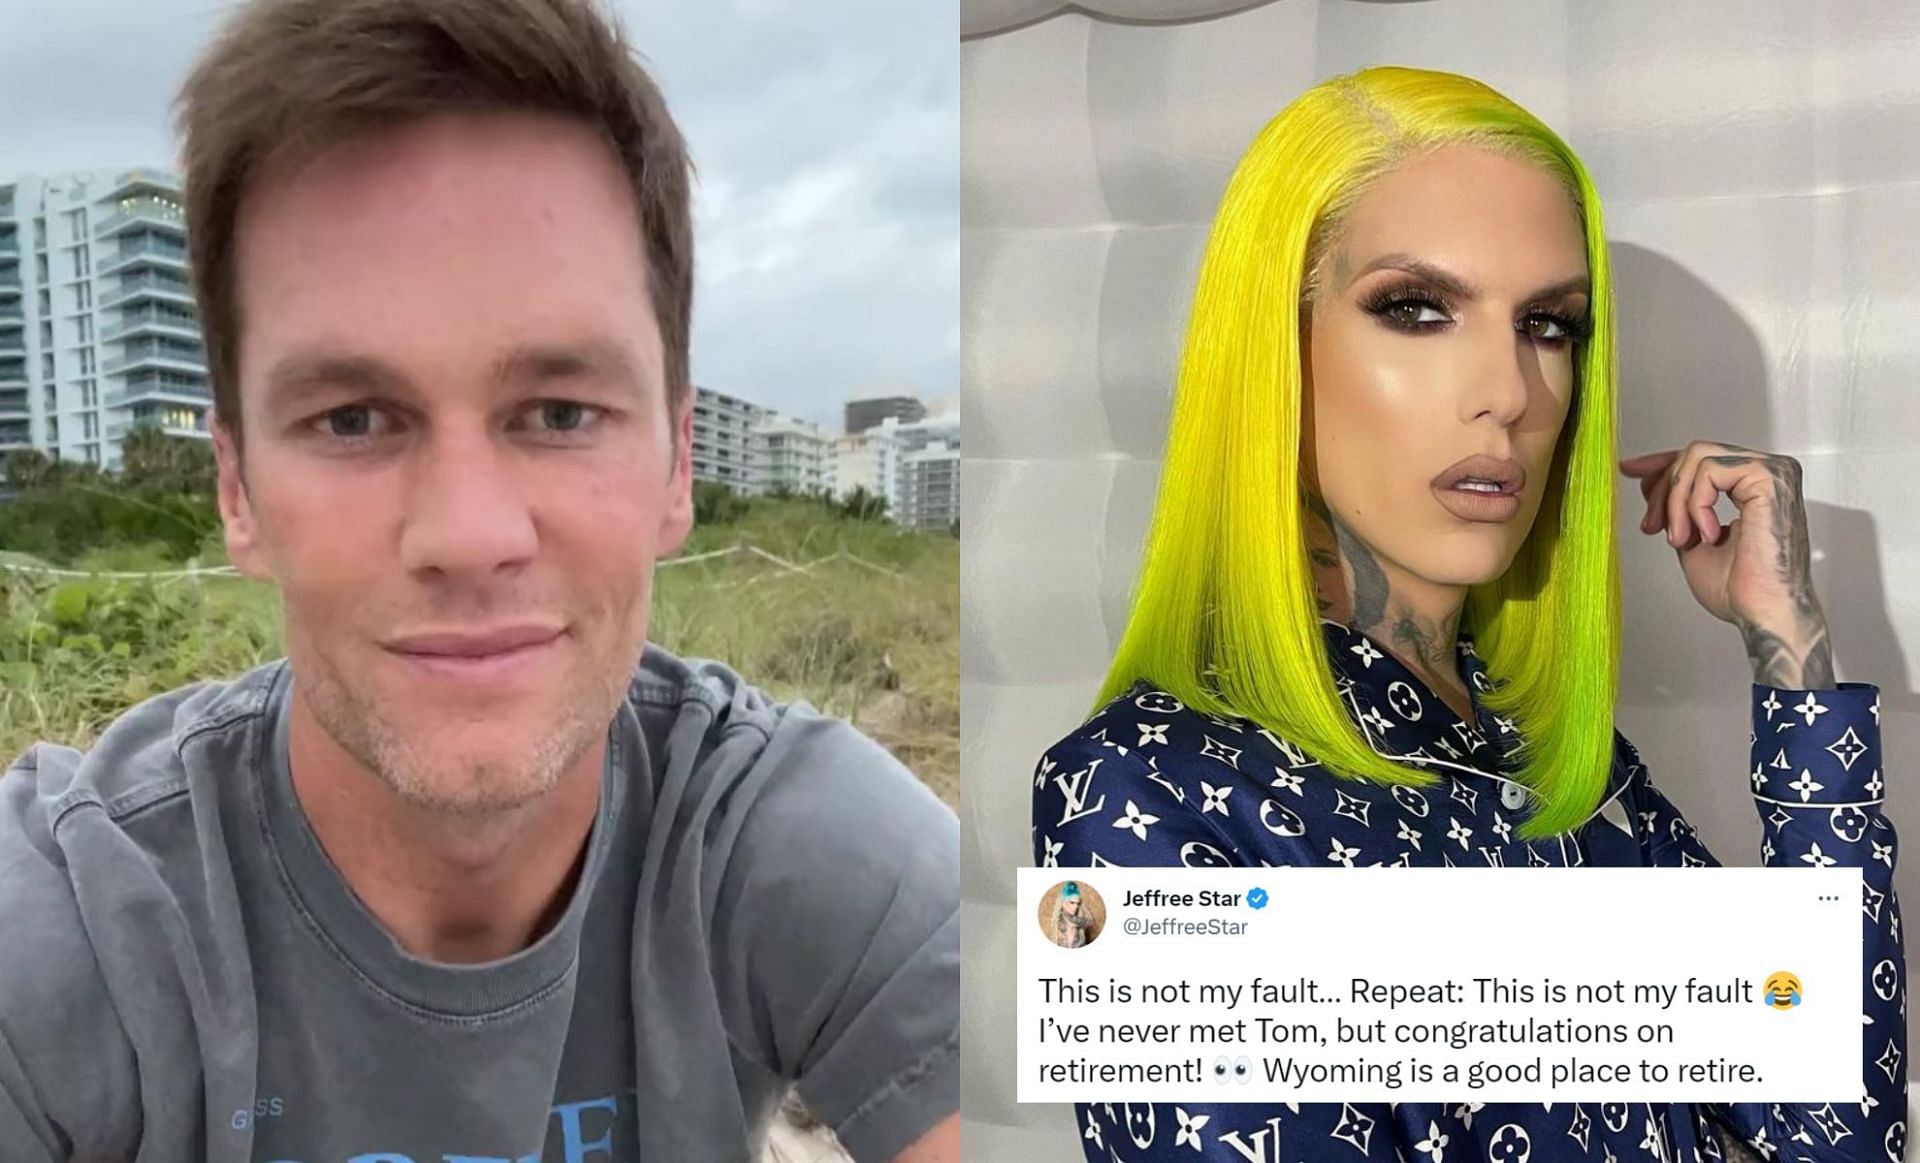 Jeffree Star chimes in on Tom Brady&rsquo;s retirement